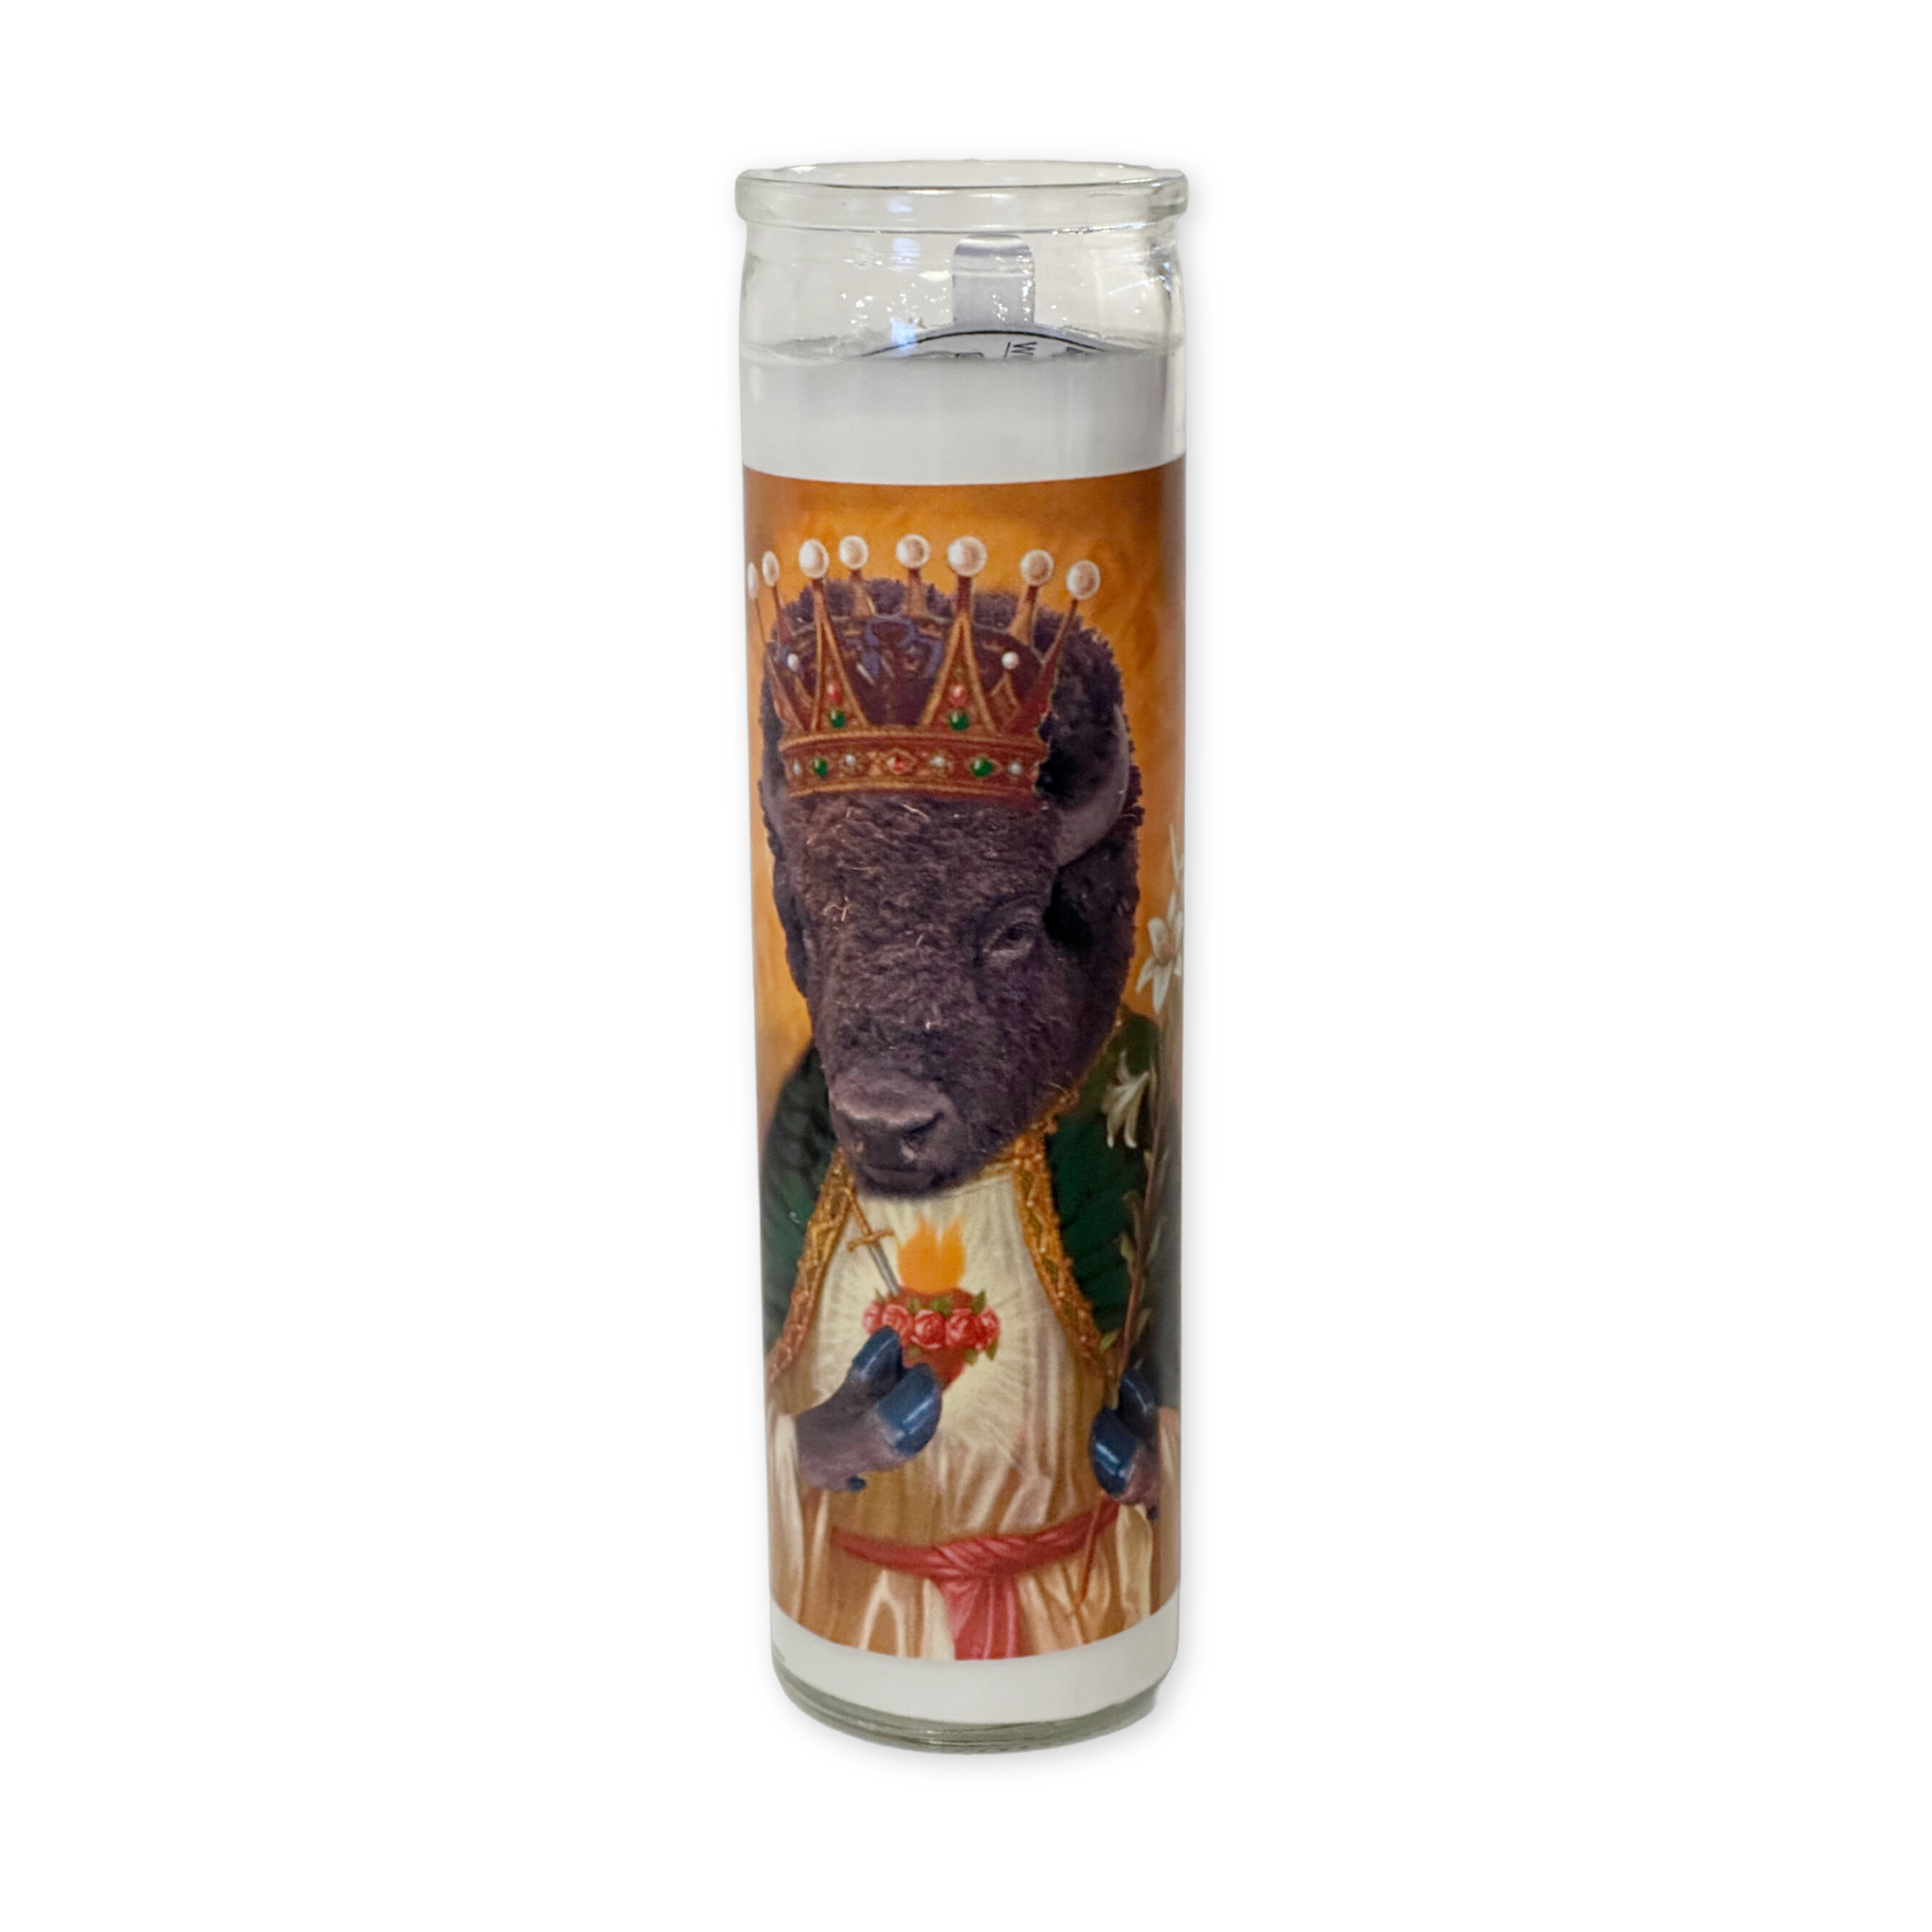 unscented prayer candle with a bison